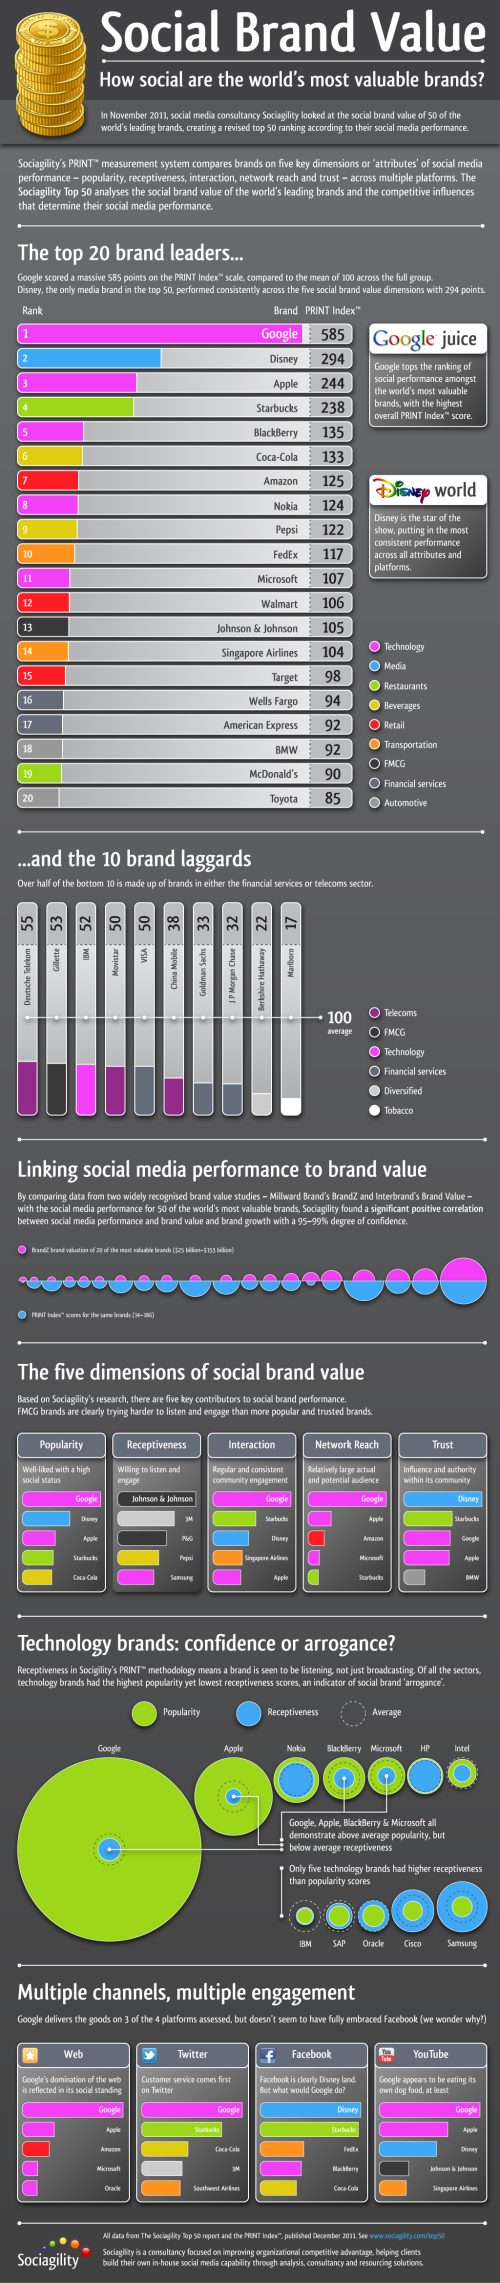 Erobre lodret Mart The Social Brand Value of the World's Leading Brands — Cool Infographics